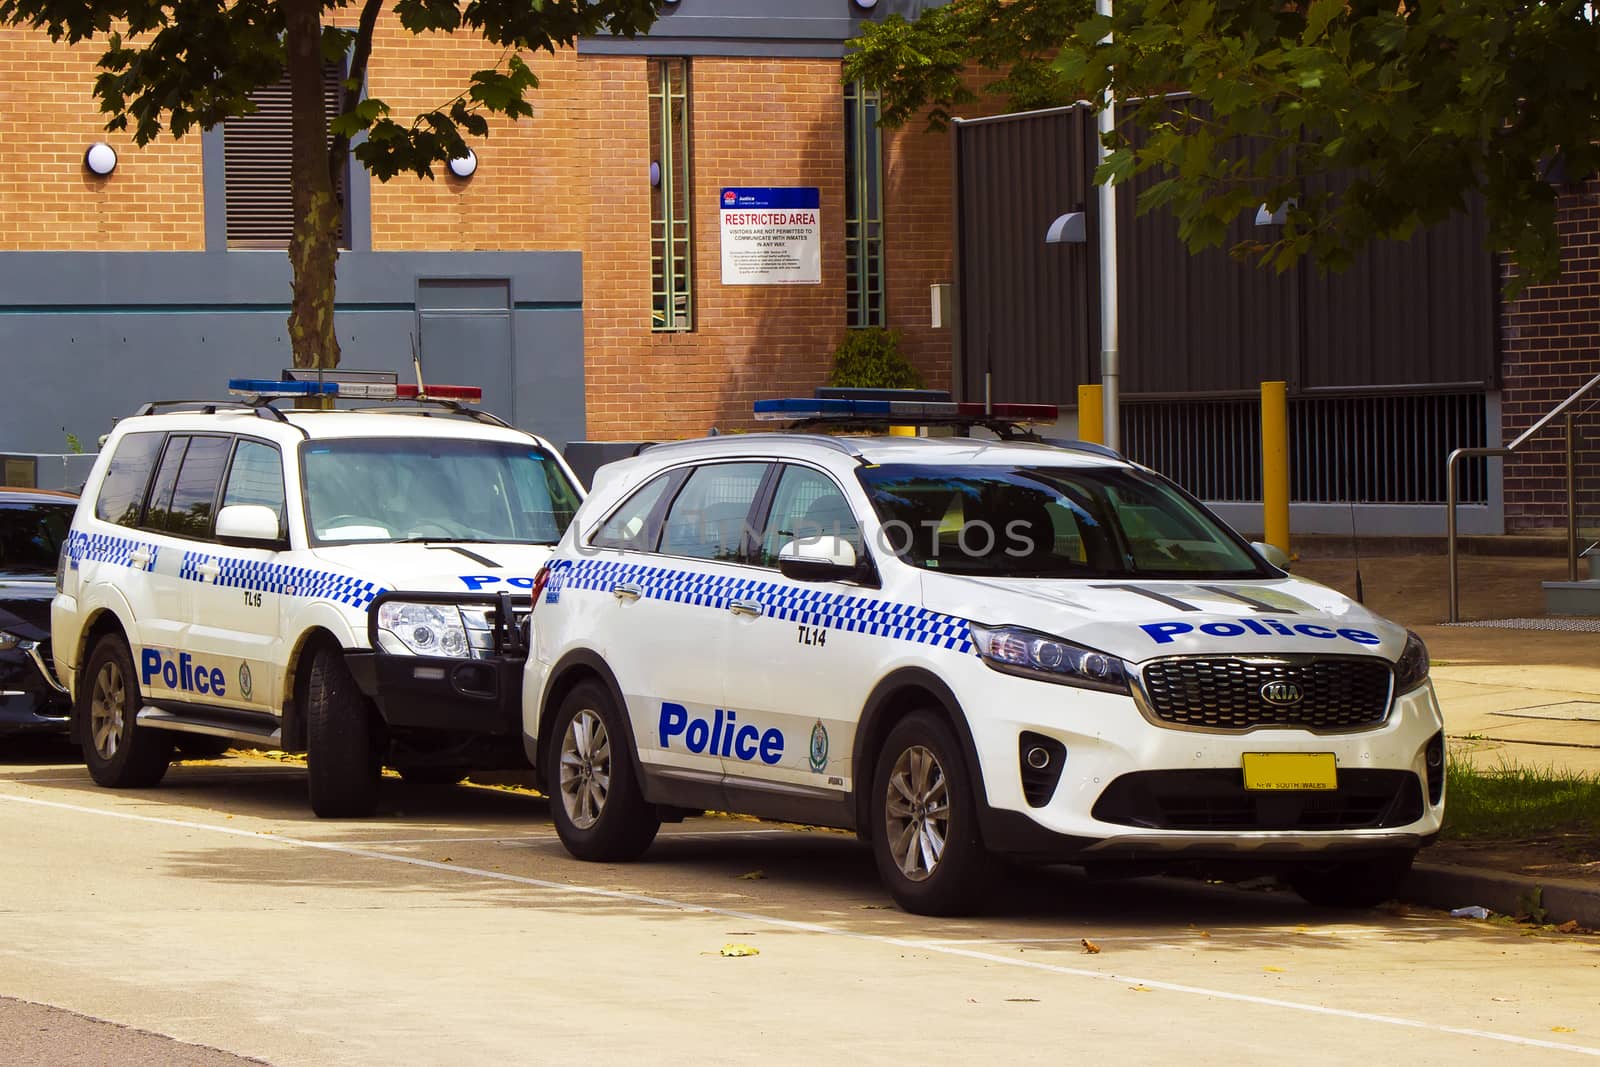 Police cars parked outside Police station by definitearts